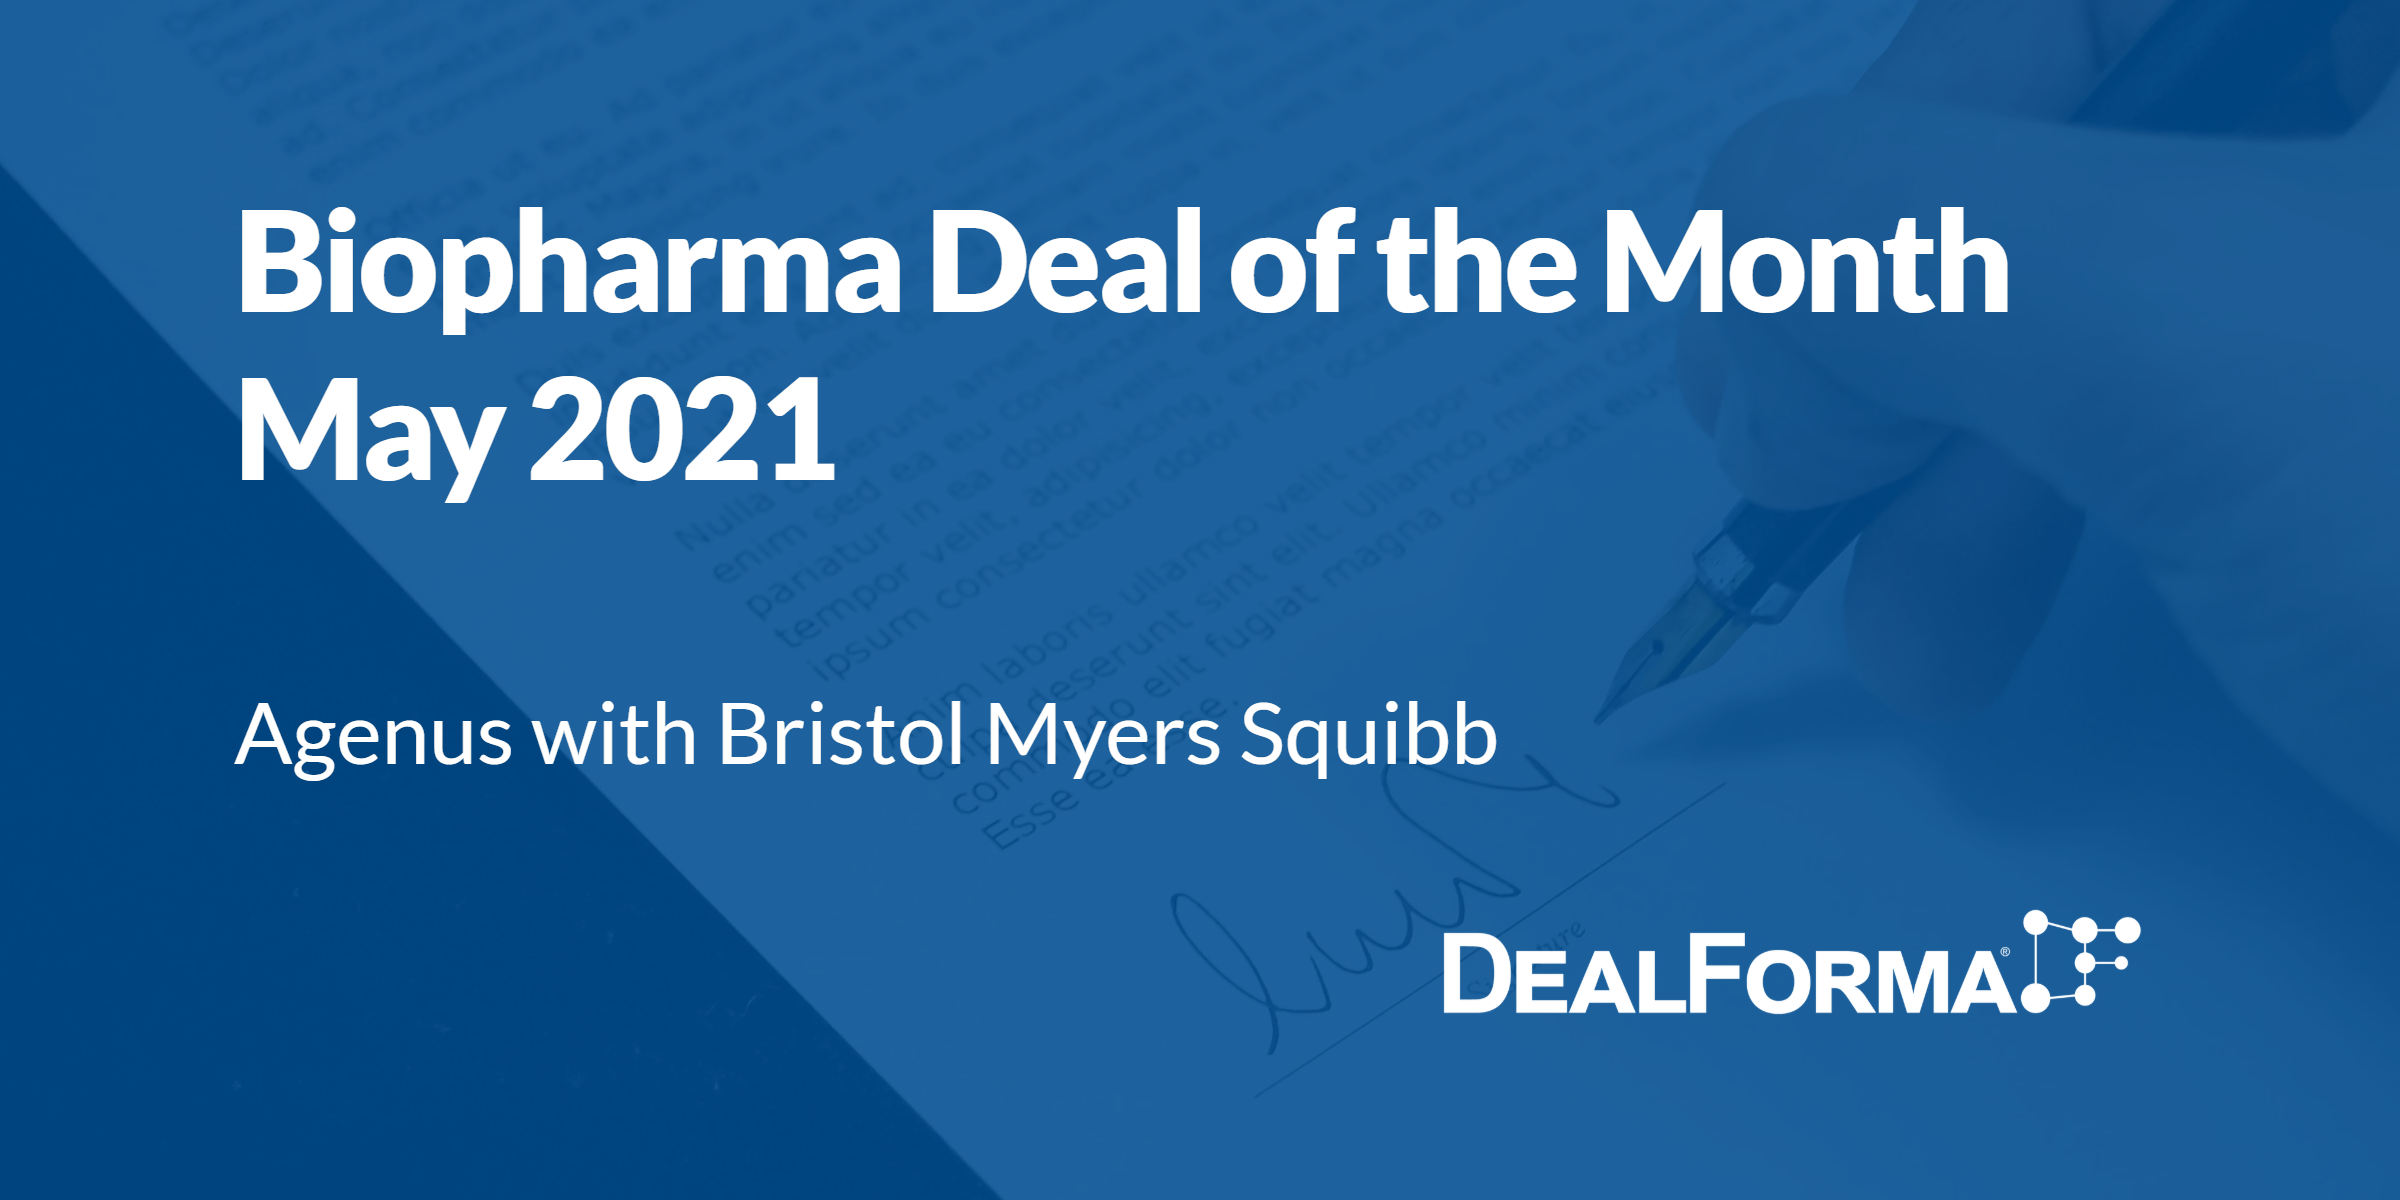 Top biopharma deal upfront May 2021